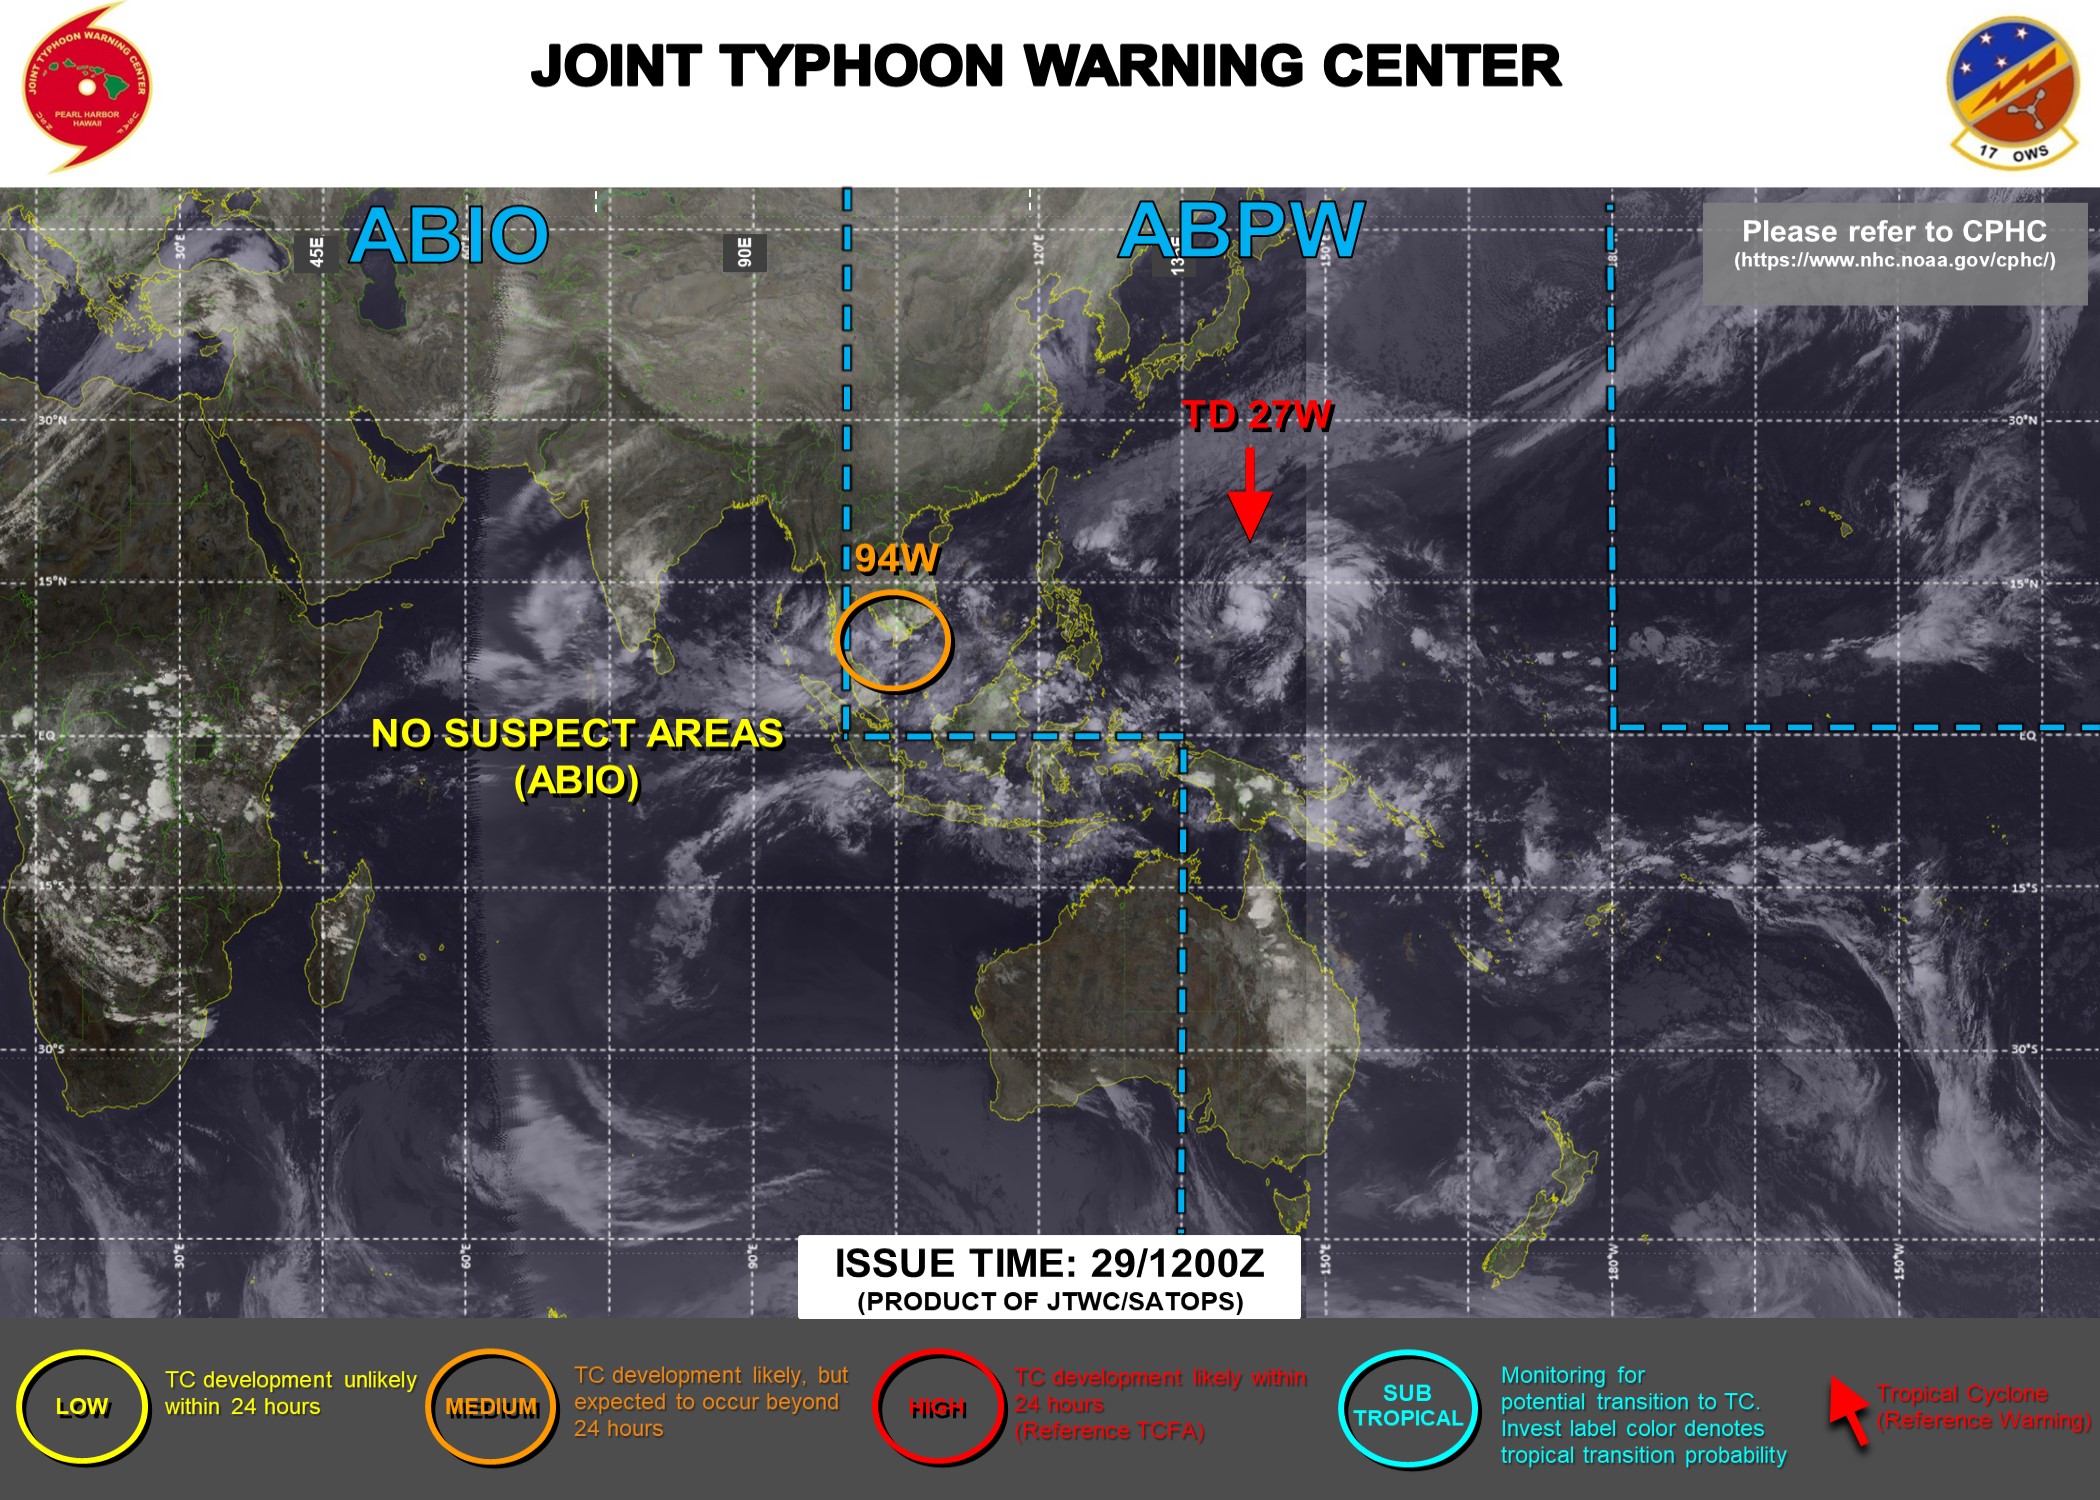 JTWC IS ISSUING 6HOURLY WARNINGS AND 3HOURLY SATELLITE BULLETINS ON TD 27W.